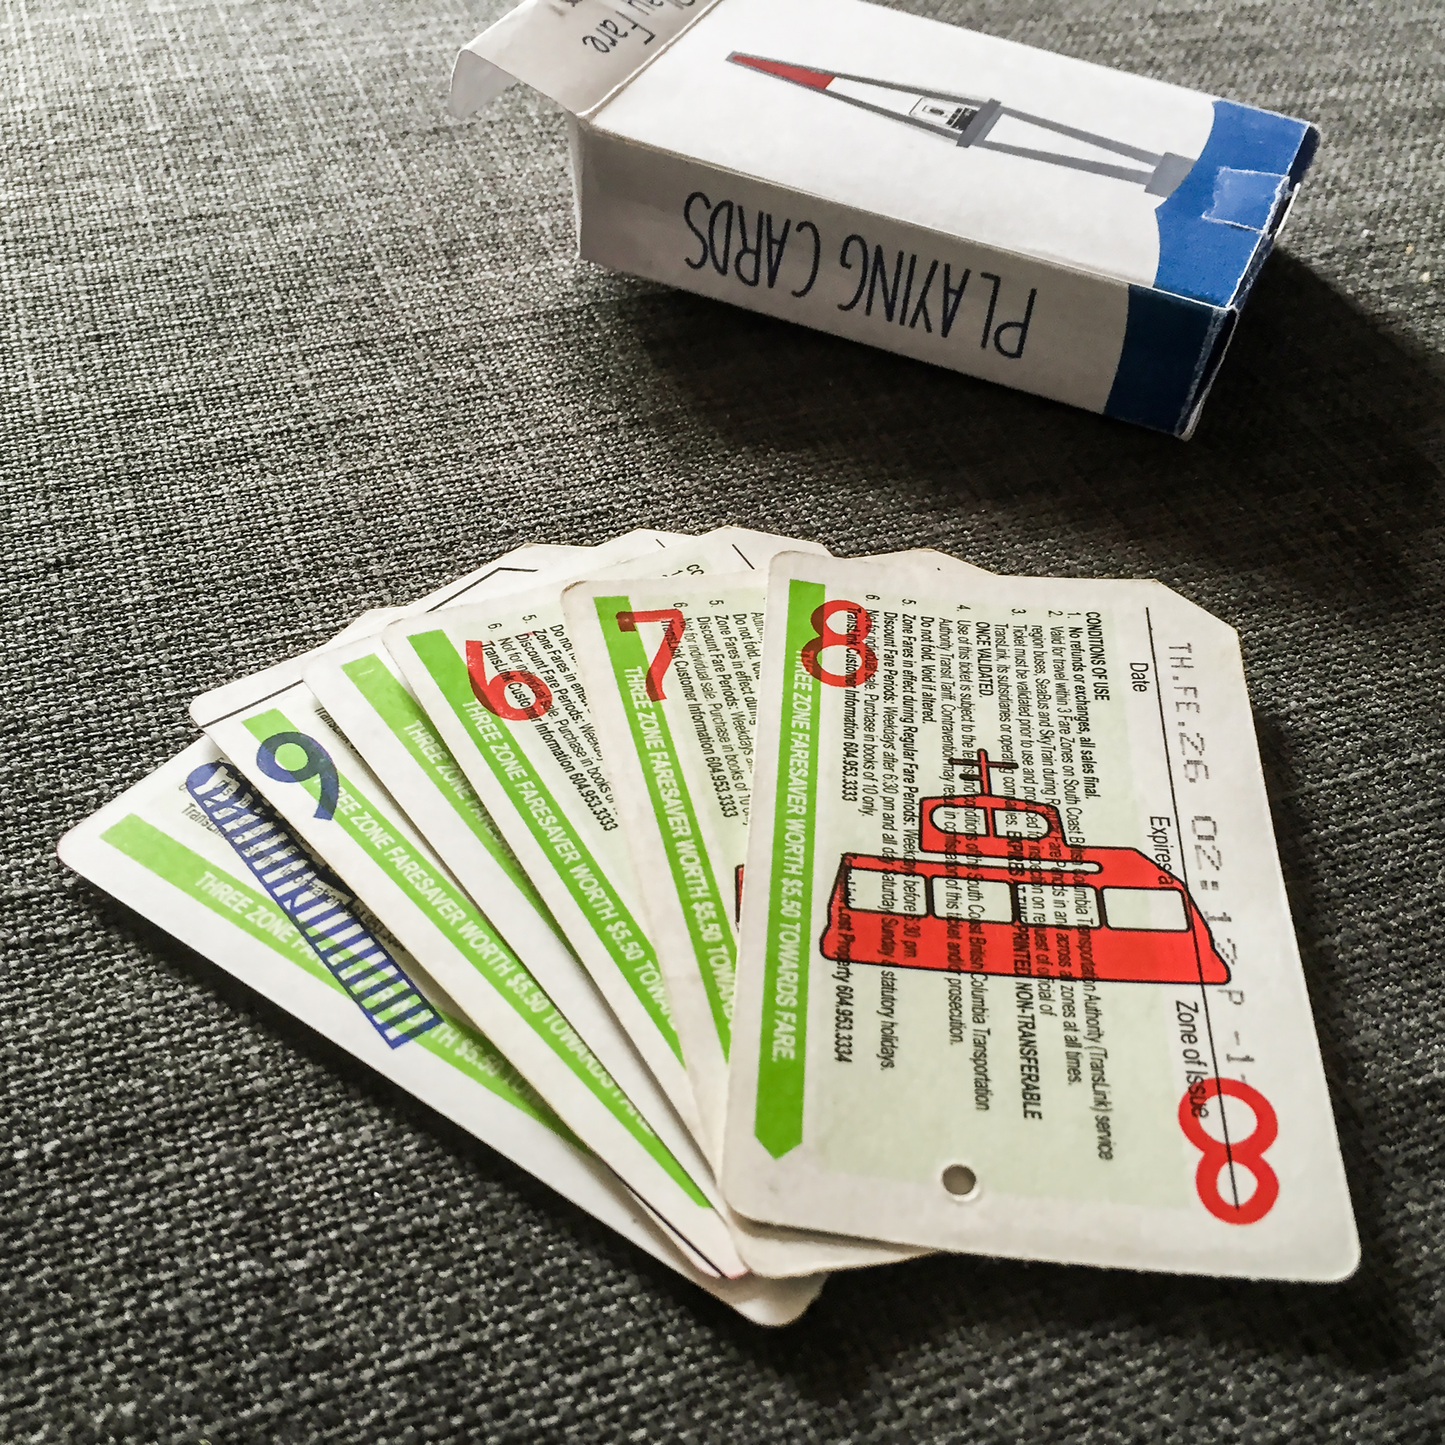 Repurposed transit fare cards, as deck of cards; illustrated box in background.